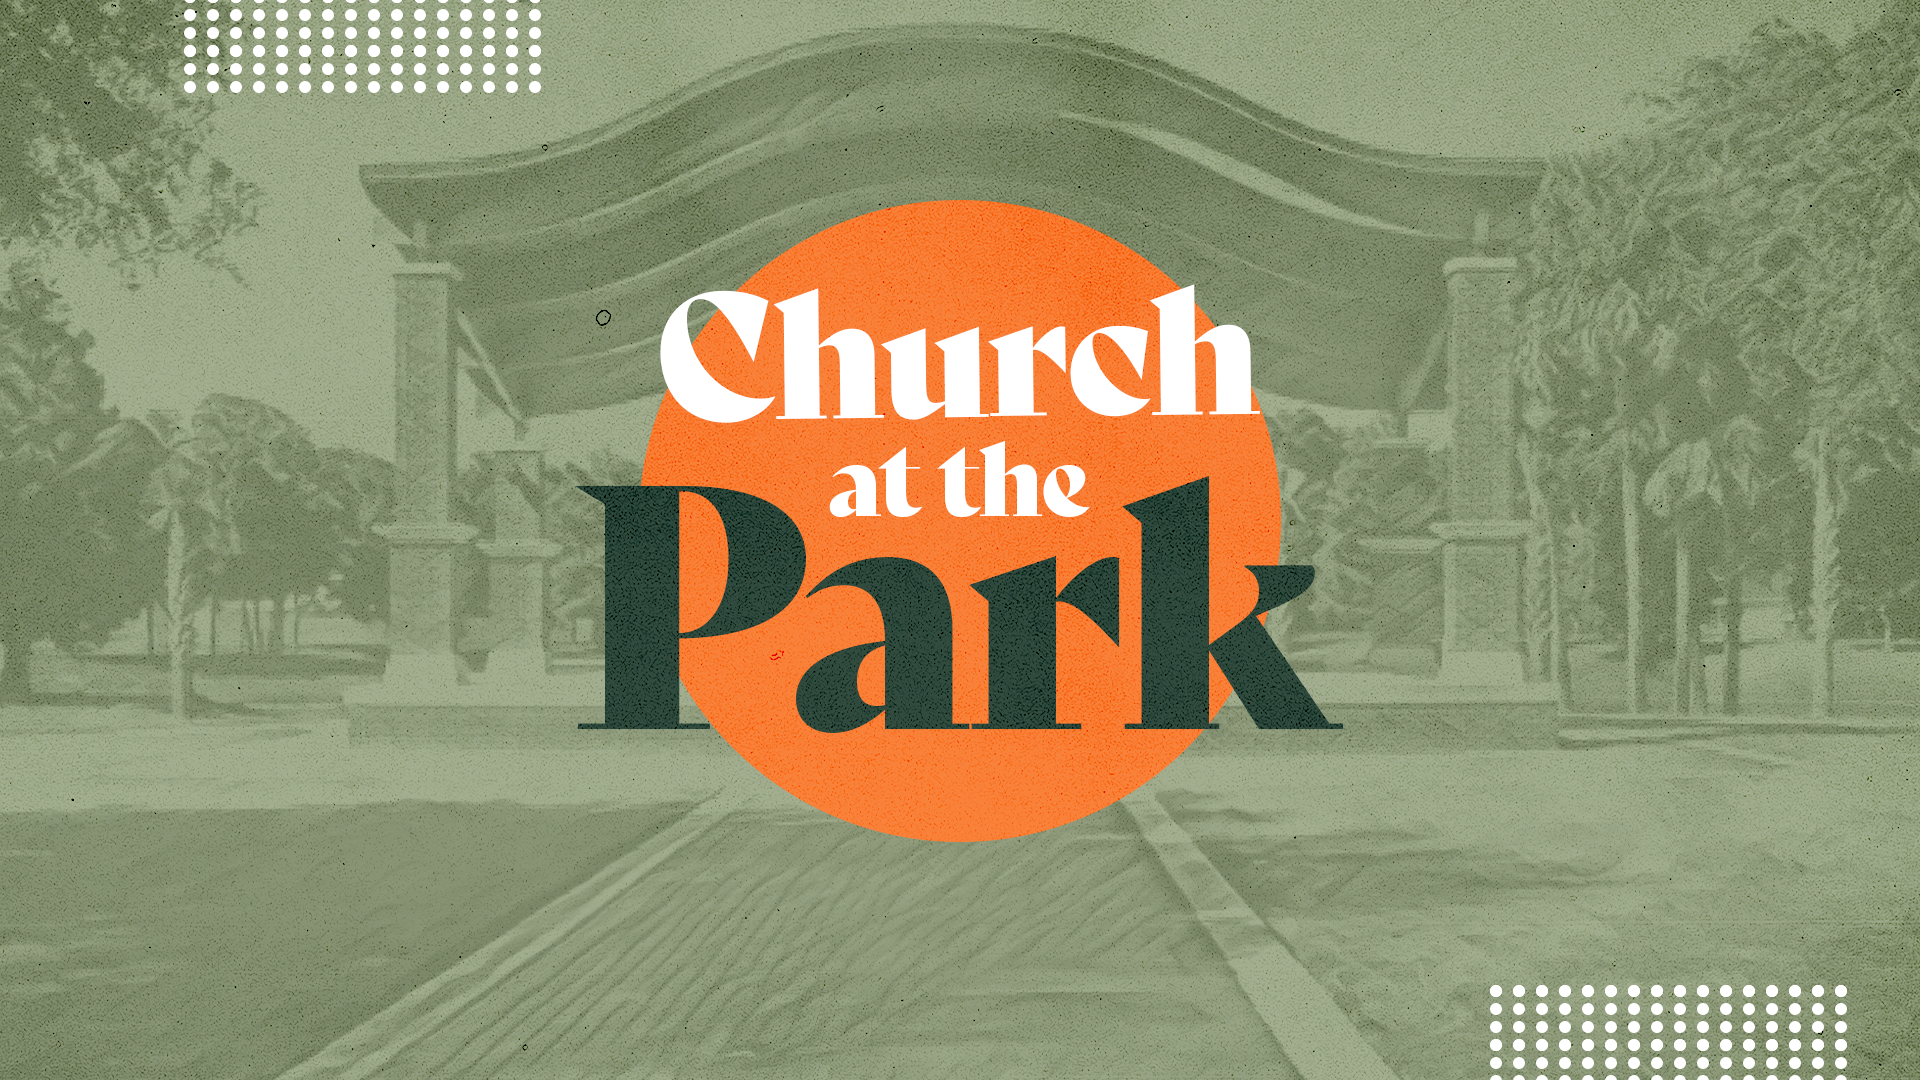 Church at the Park Graphic